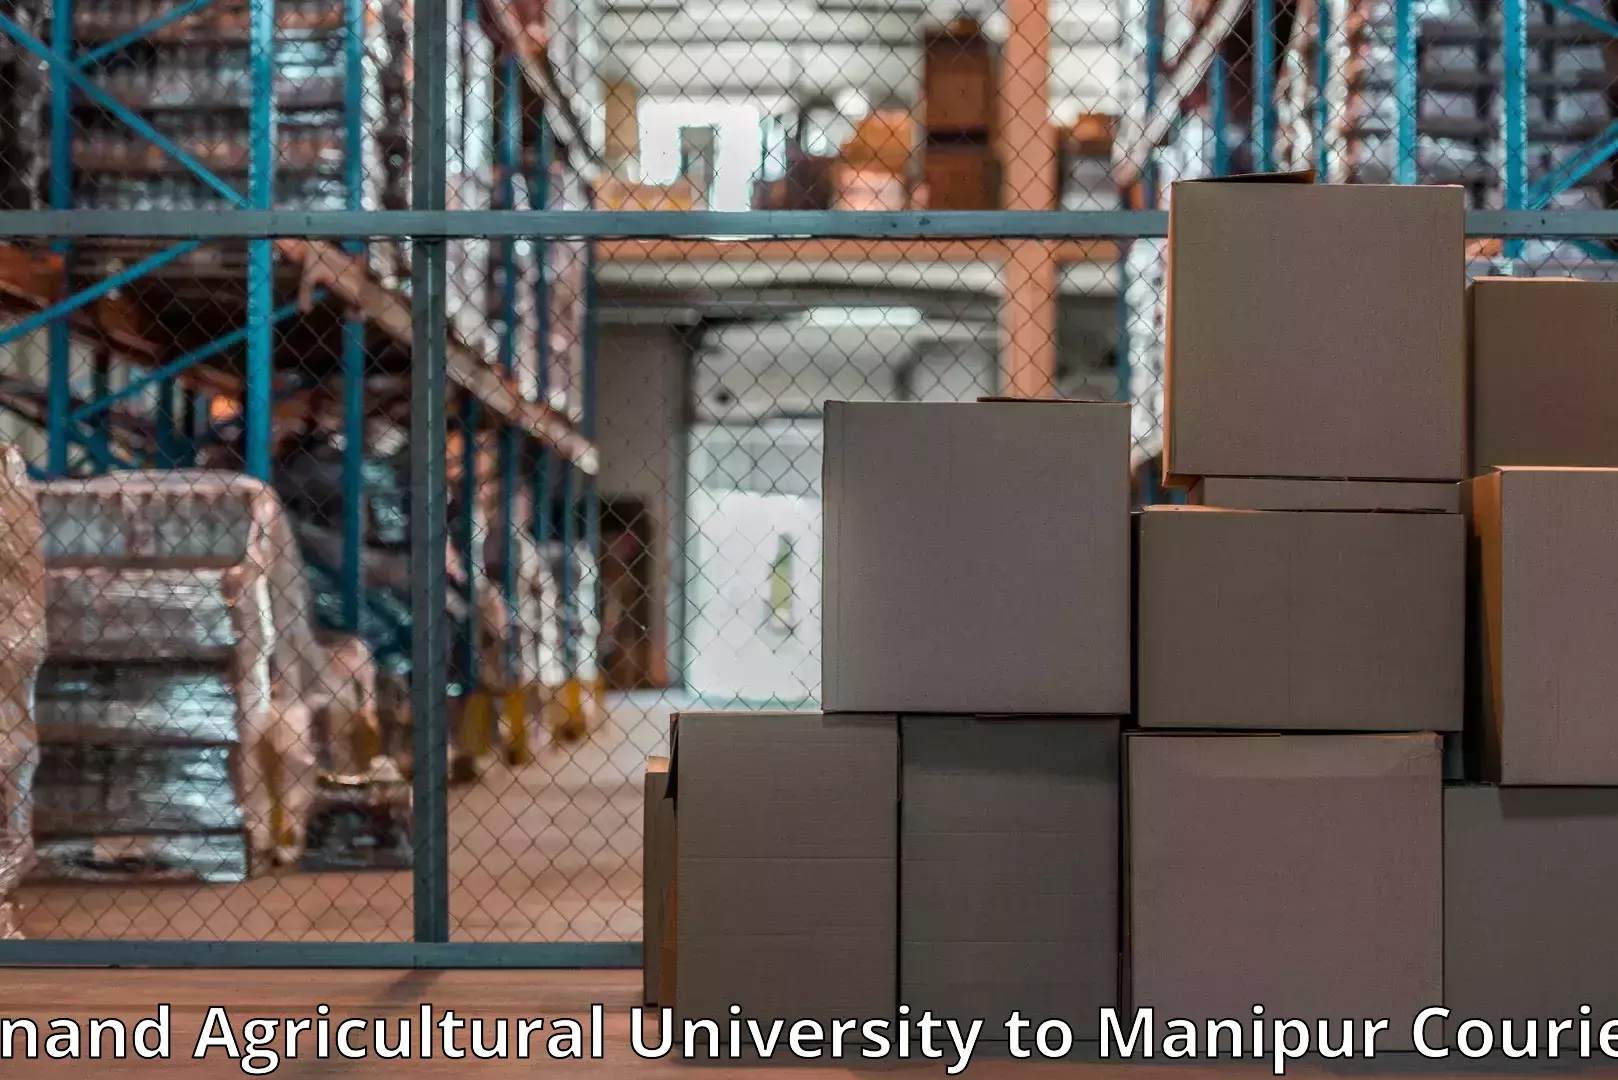 Furniture transport and storage Anand Agricultural University to Ukhrul